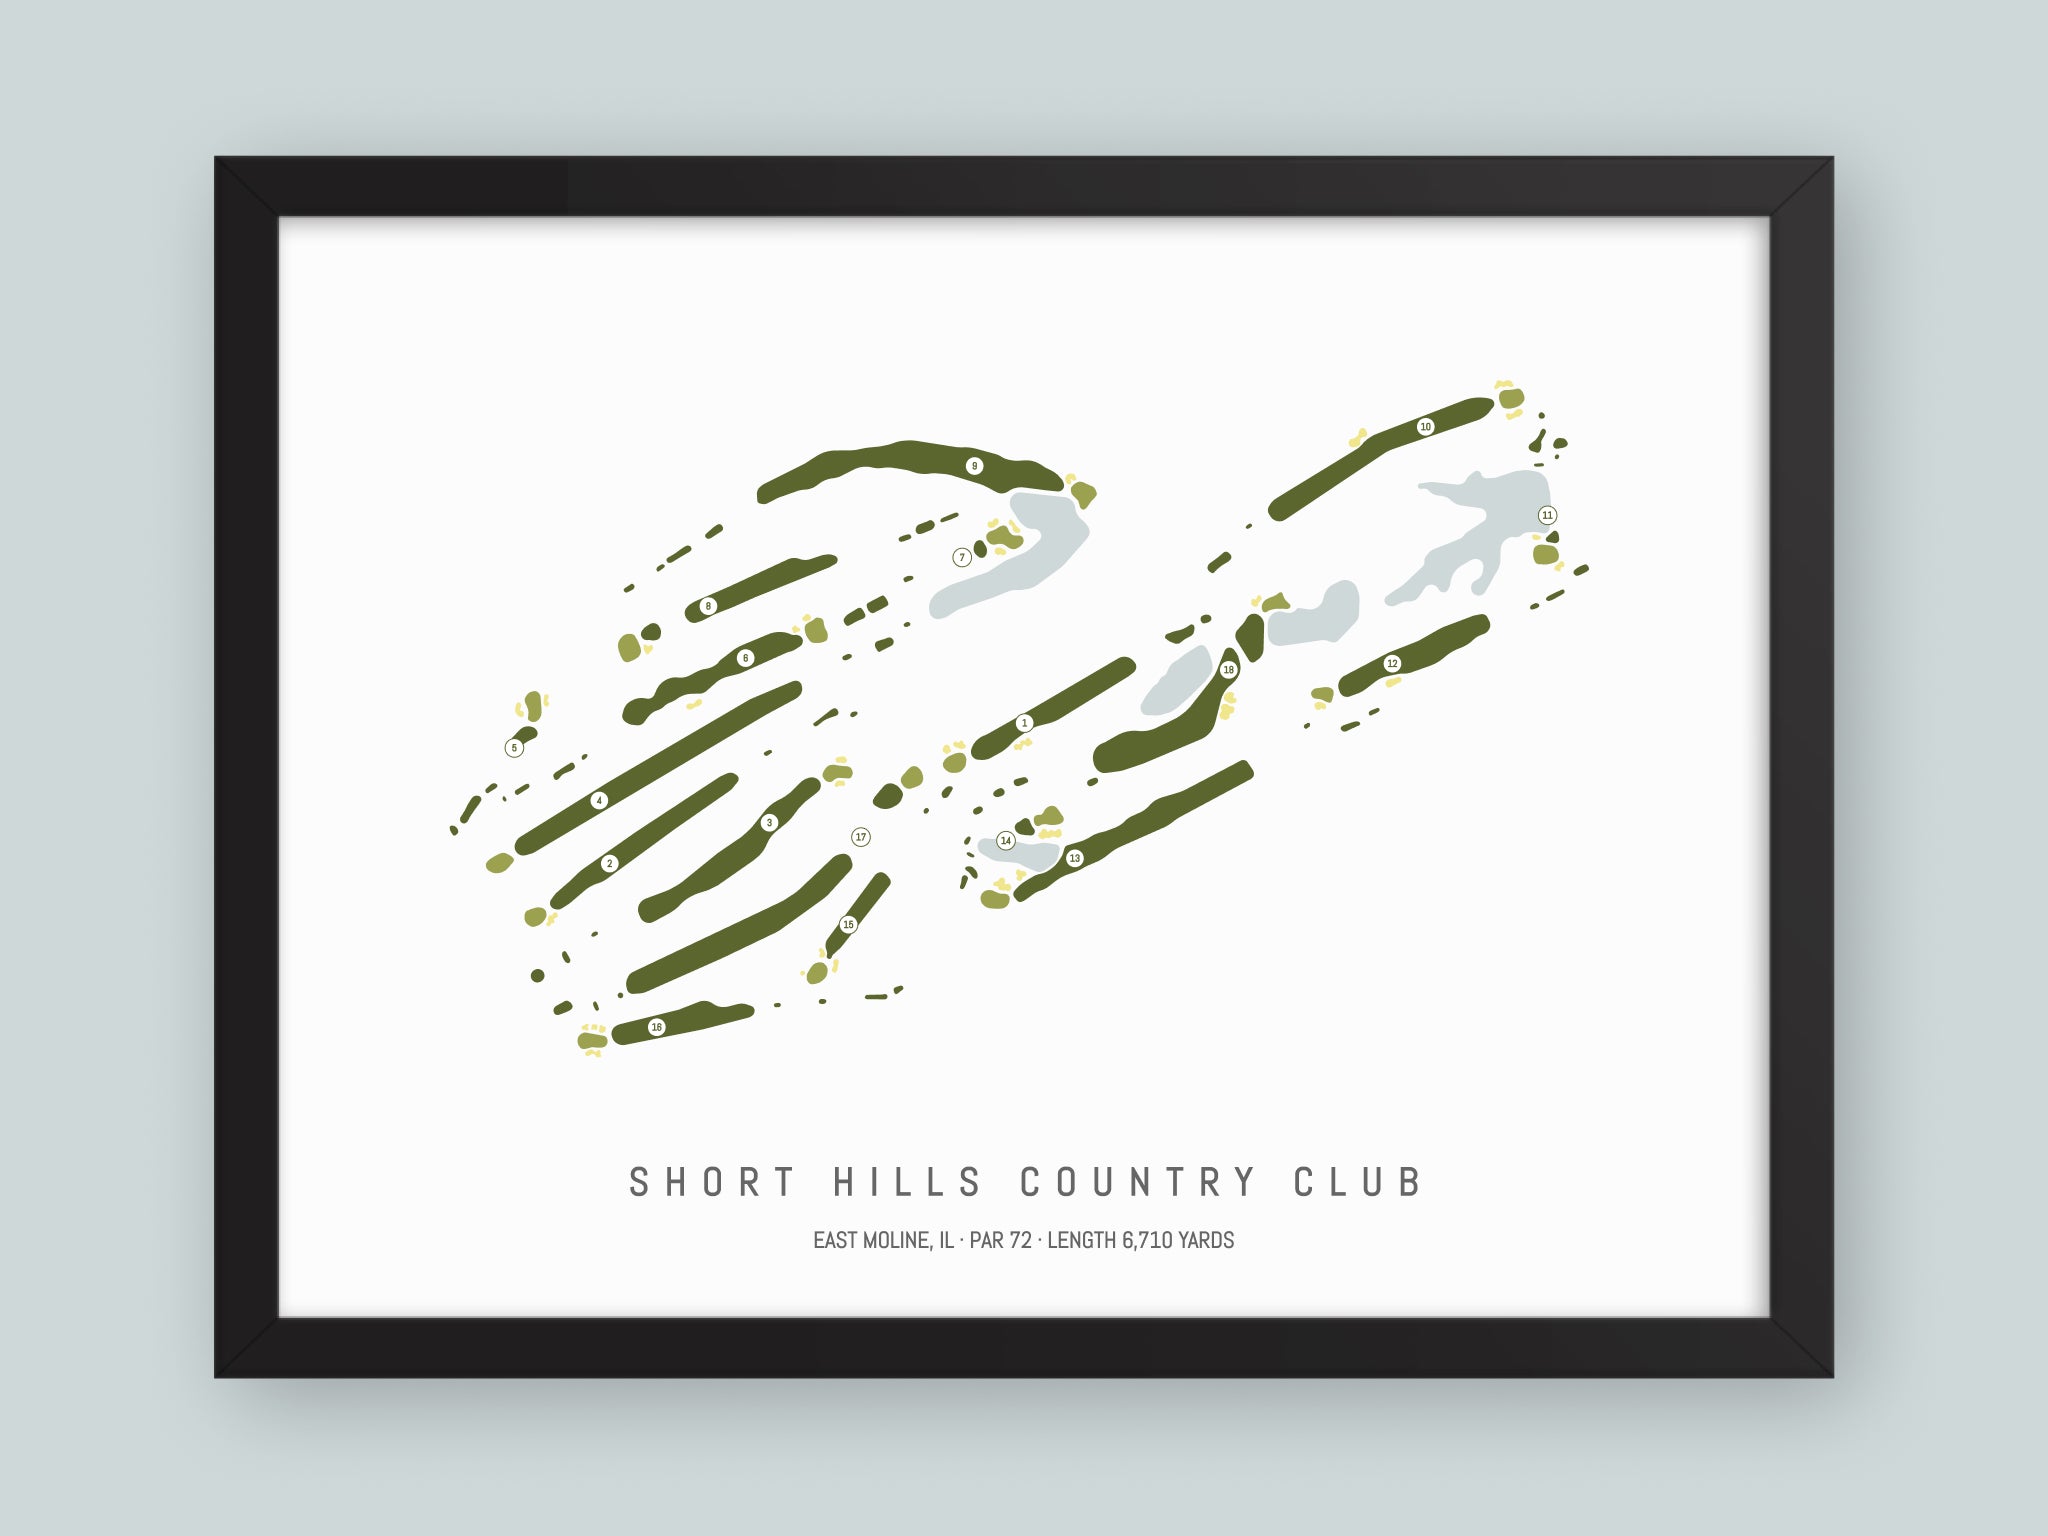 Short-Hills-Country-Club-IL--Black-Frame-24x18-With-Hole-Numbers